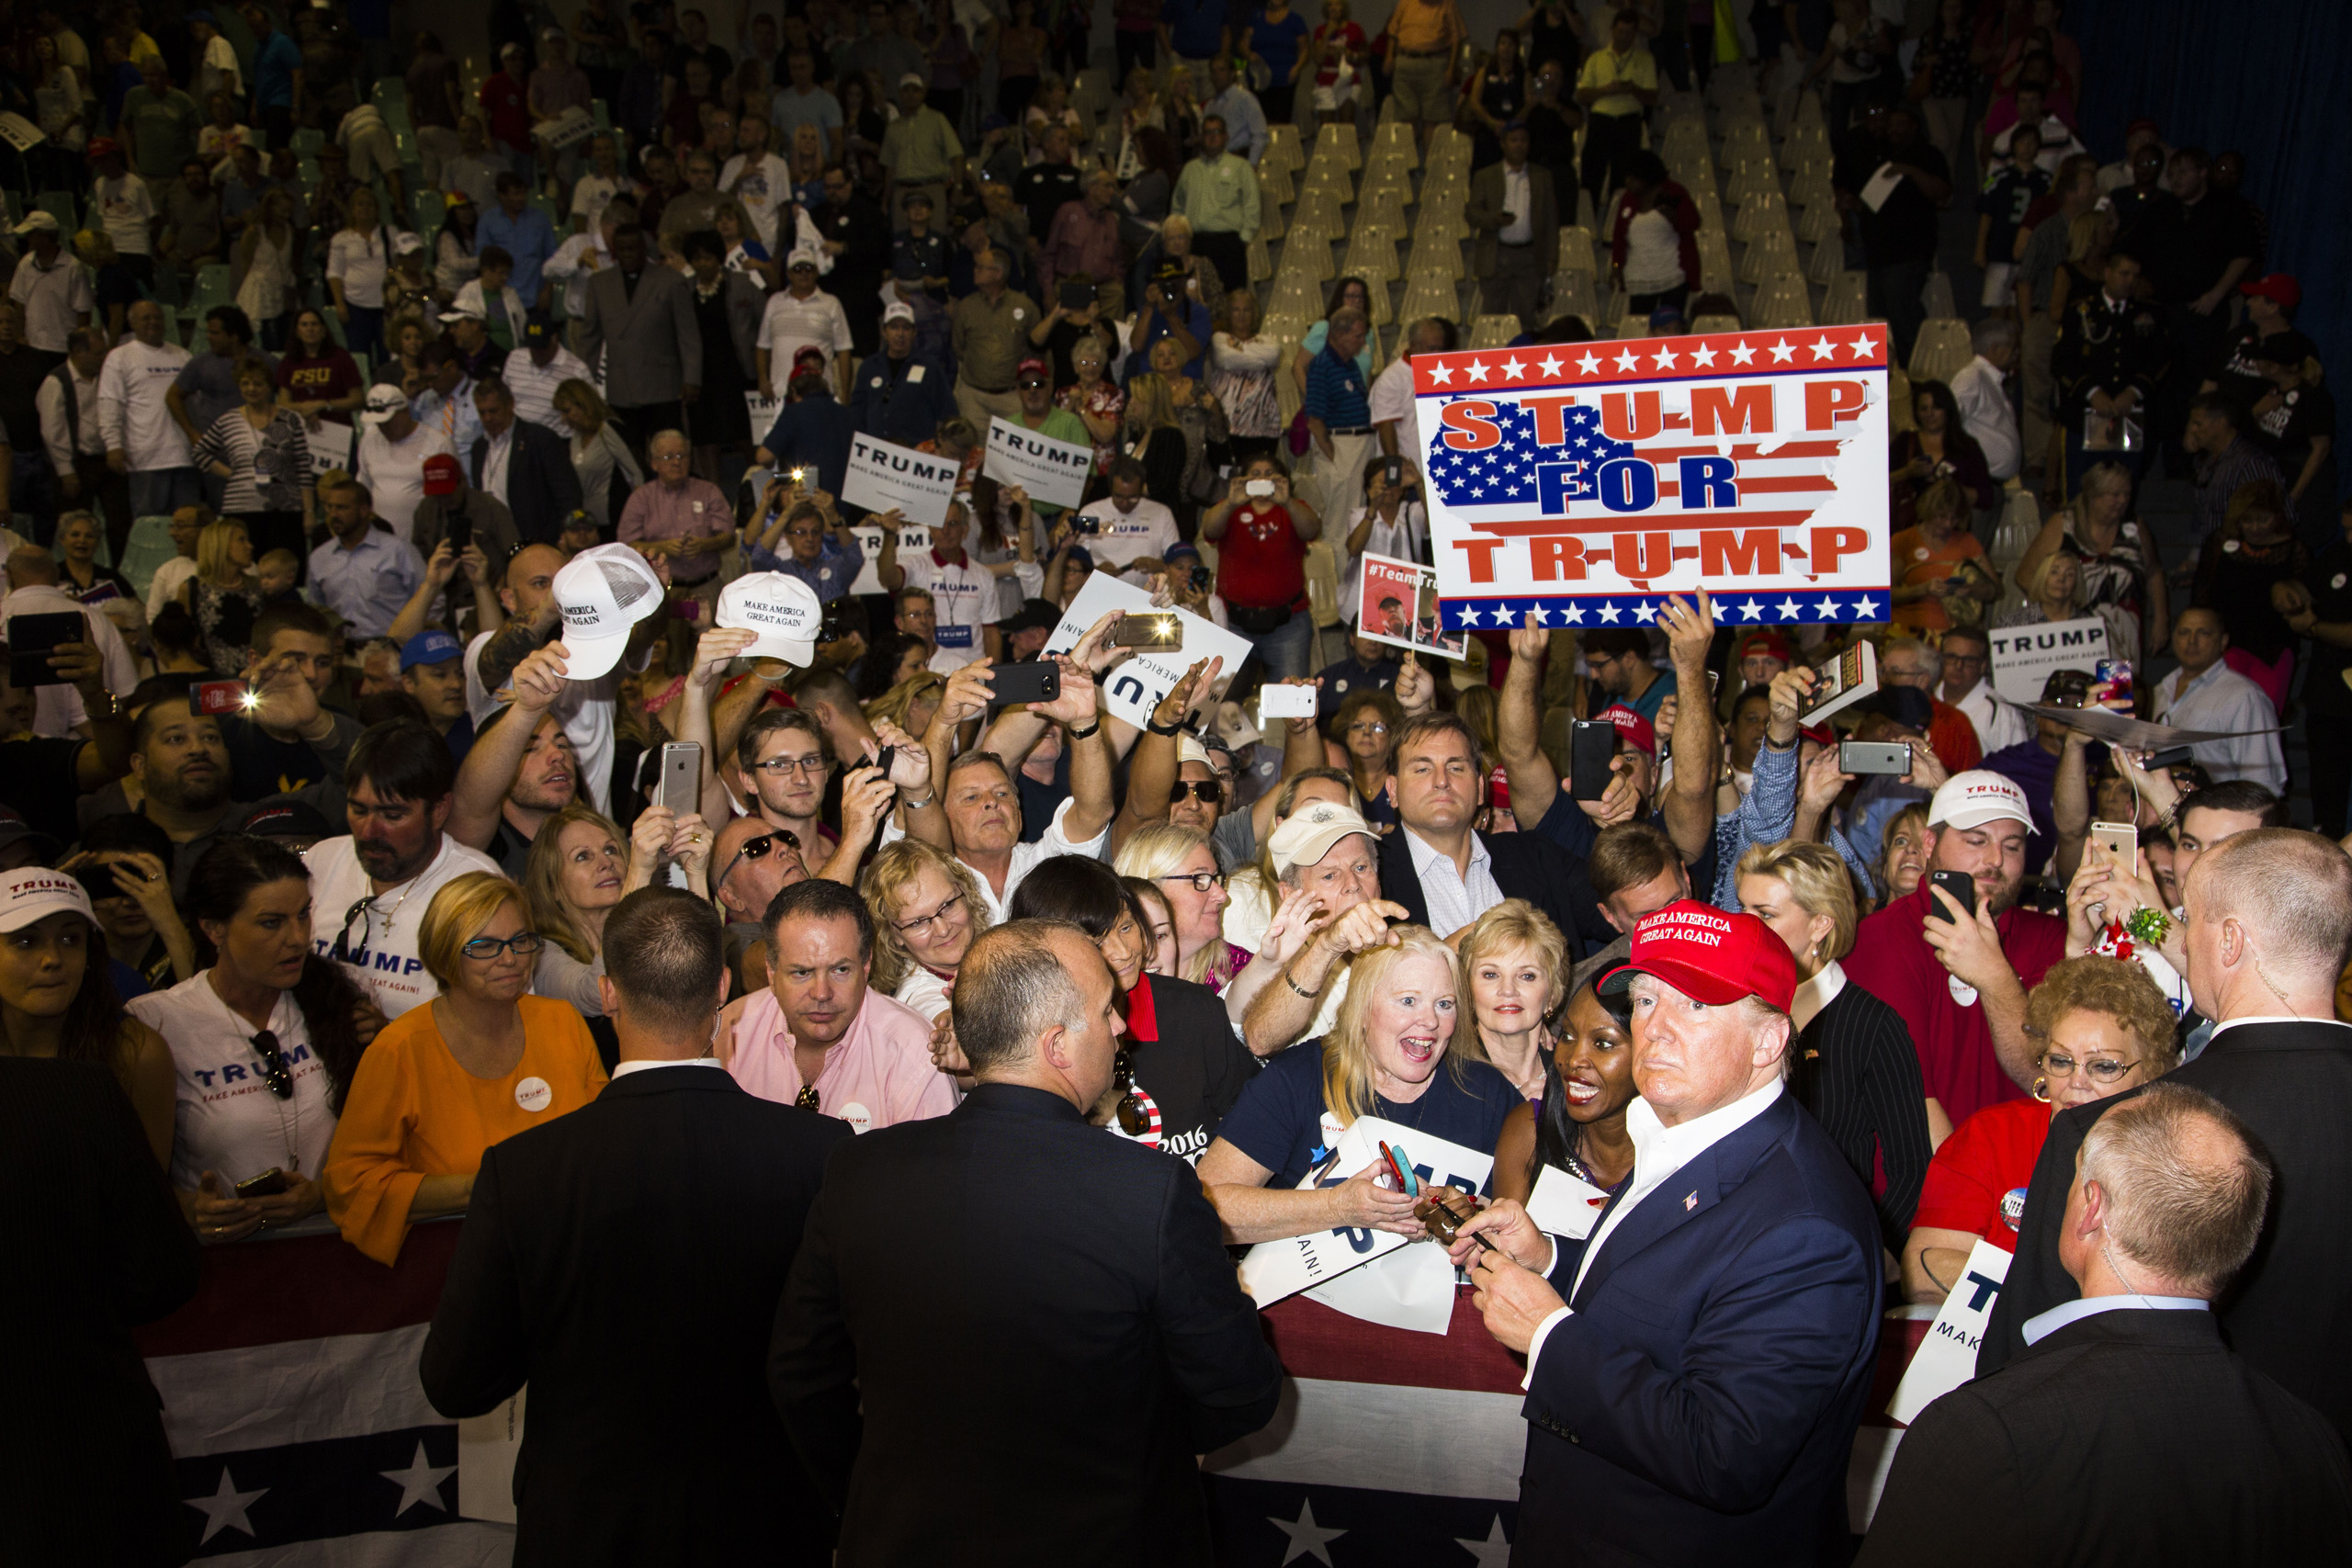 Supporters reacts to getting autographs from Republican presidential candidate Donald Trump following his rally in Sarasota, Fla. Nov. 28, 2015.